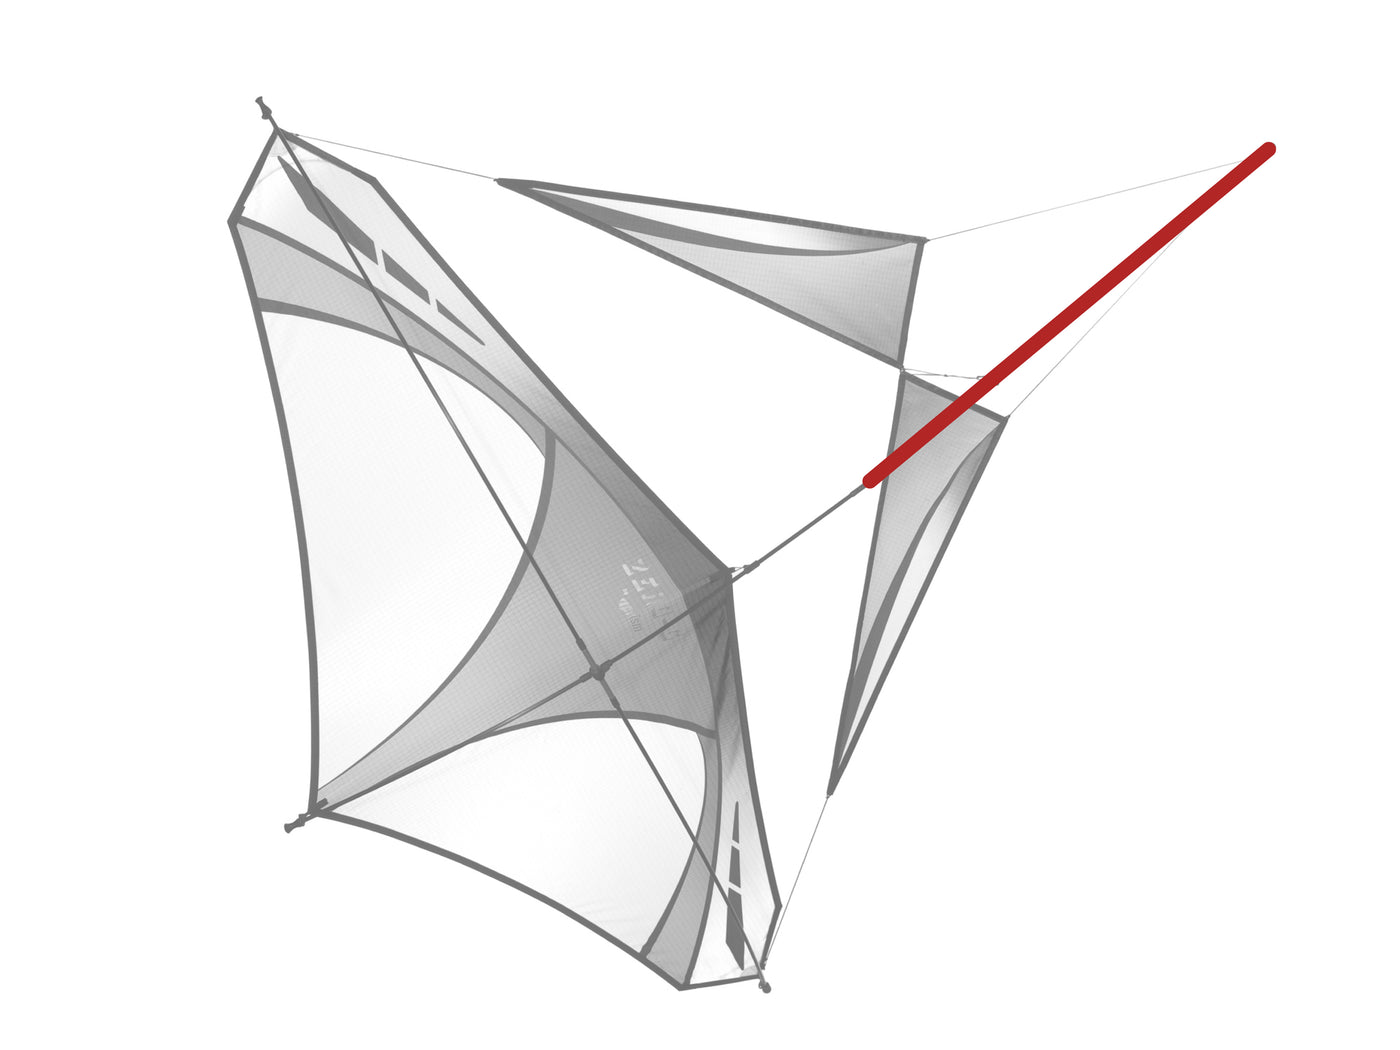 Diagram showing location of the Zero G Nose Spine on the kite.